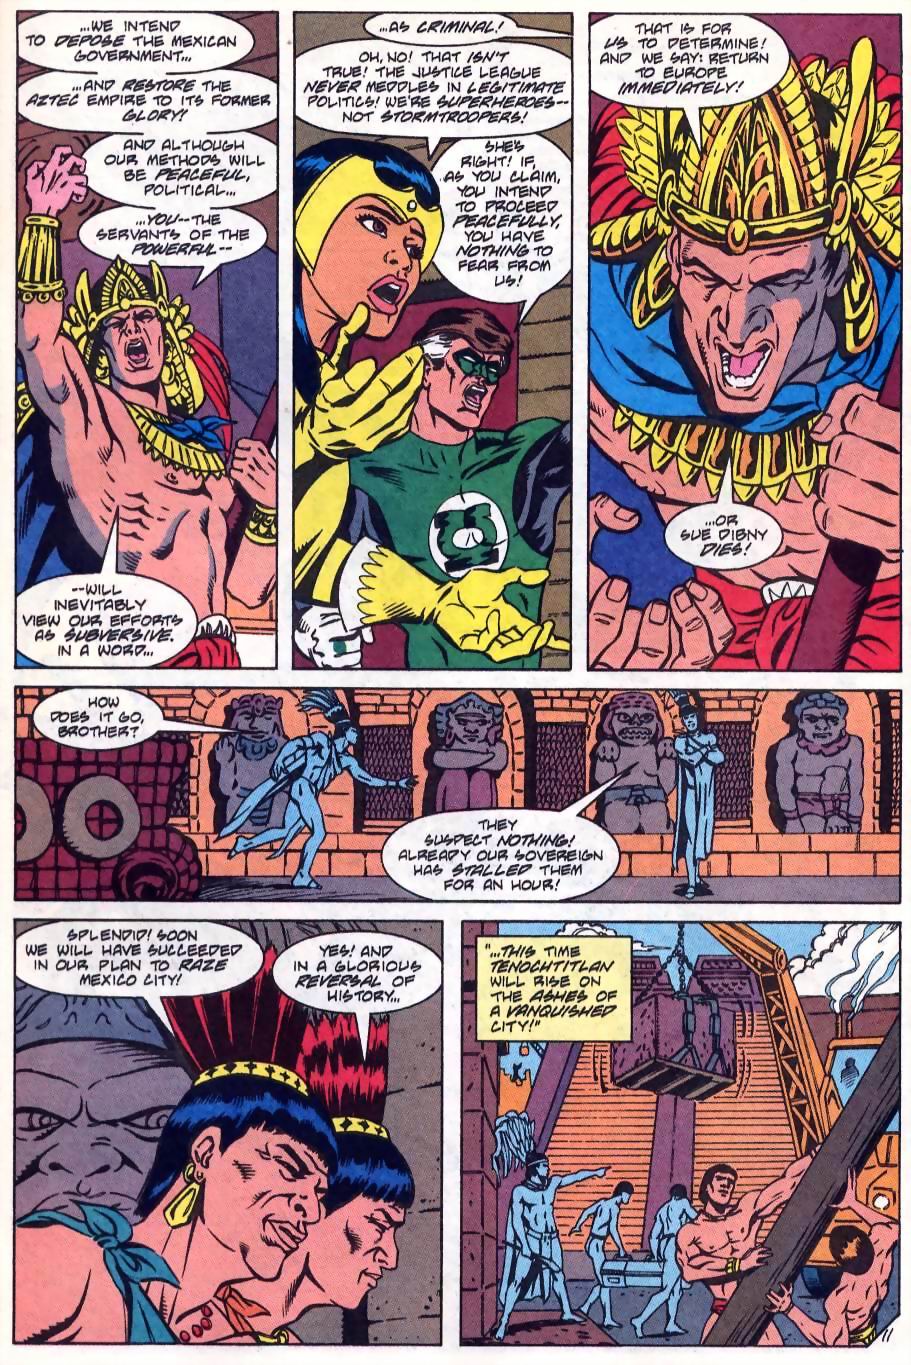 Justice League International (1993) 51 Page 11